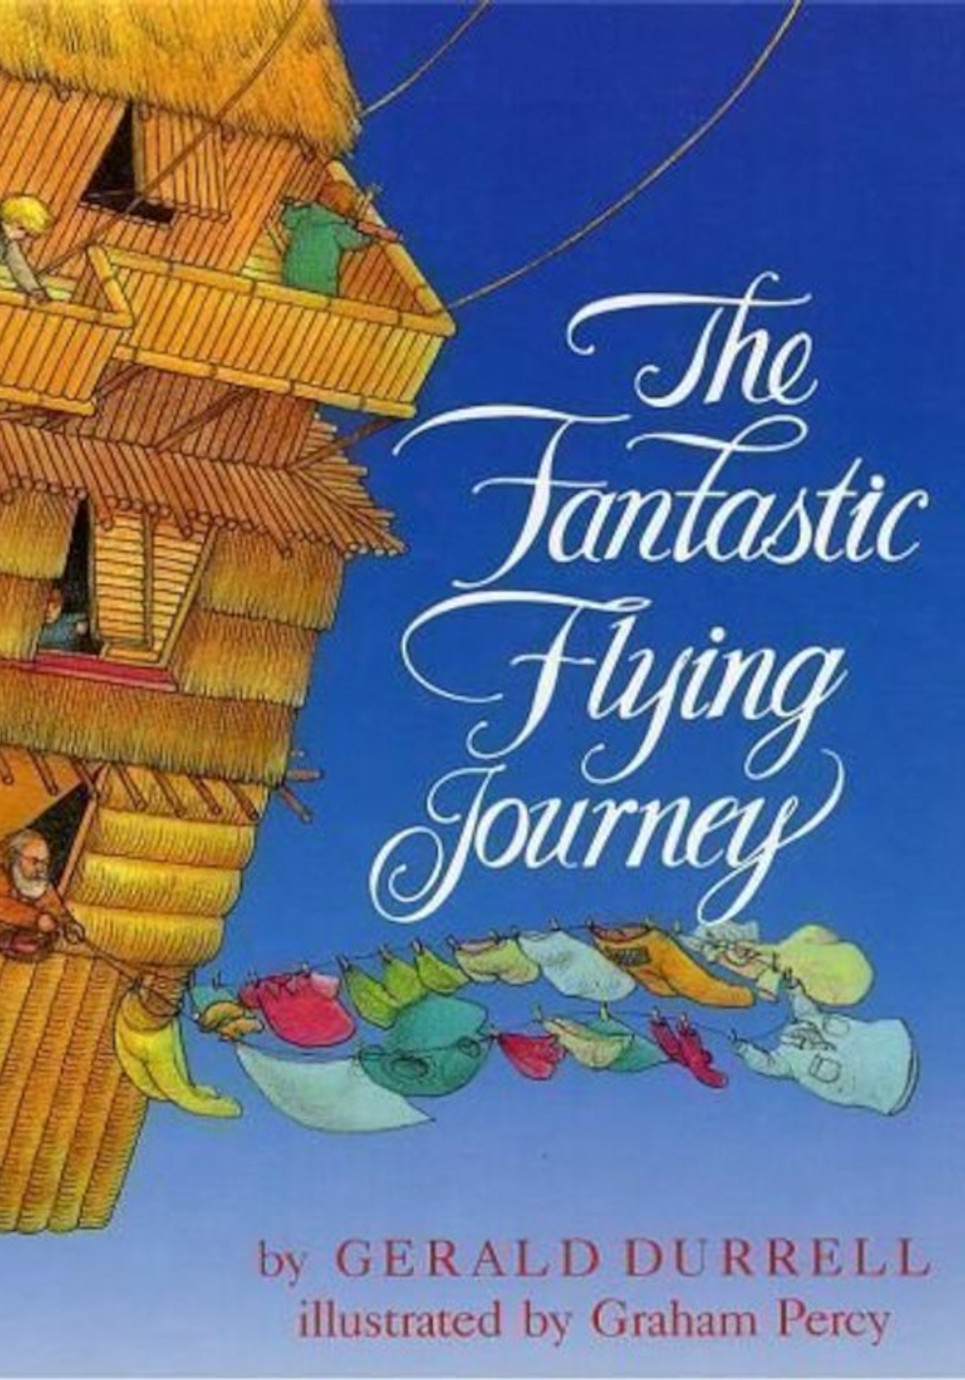 The Fantastic Flying Journey (Gerald Durrell, 2018)